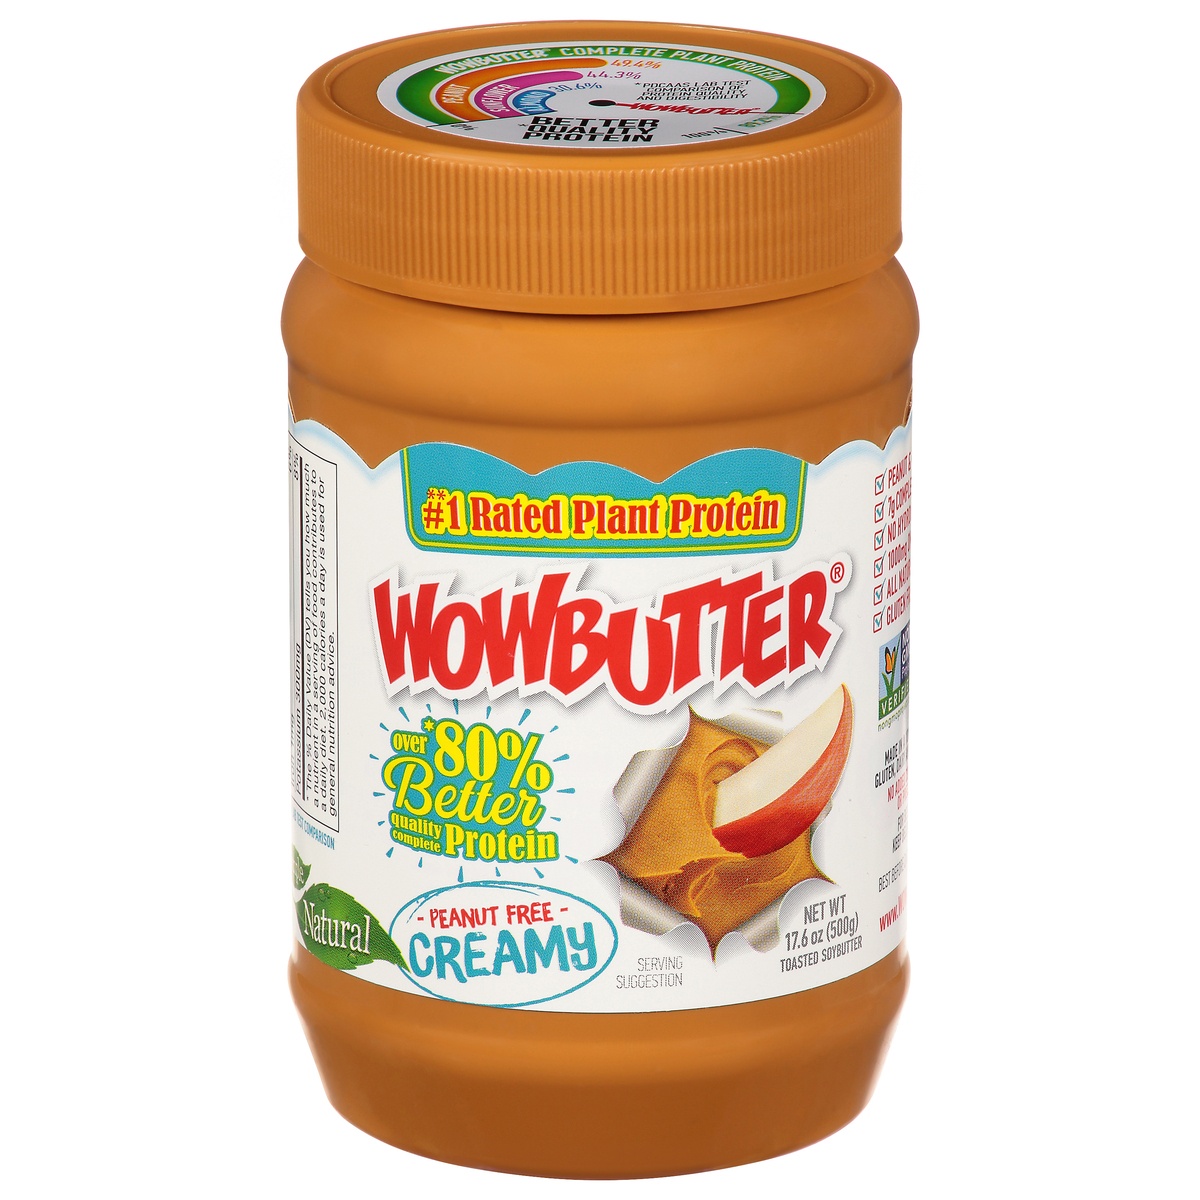 slide 1 of 1, WOWBUTTER Peanut Free Creamy Toasted Soybutter 17.6 oz Jar, 17.6 oz